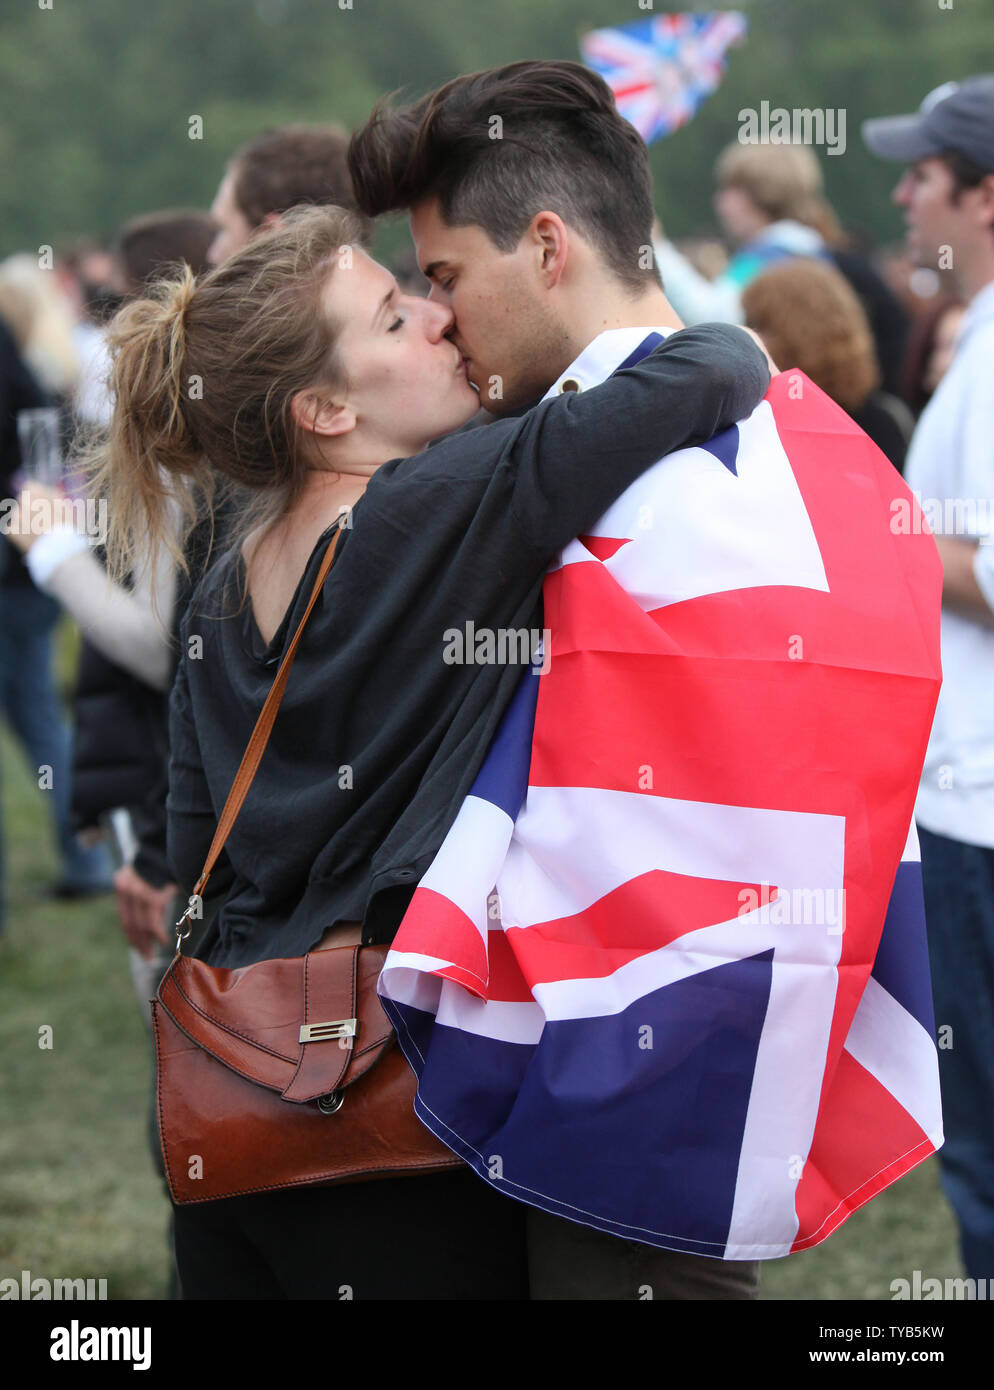 Royal well-wishers share a kiss during the celebration the wedding of Prince  William and Princess Catherine in Hyde Park in London on April 29, 2011.  The former Kate Middleton married Prince William